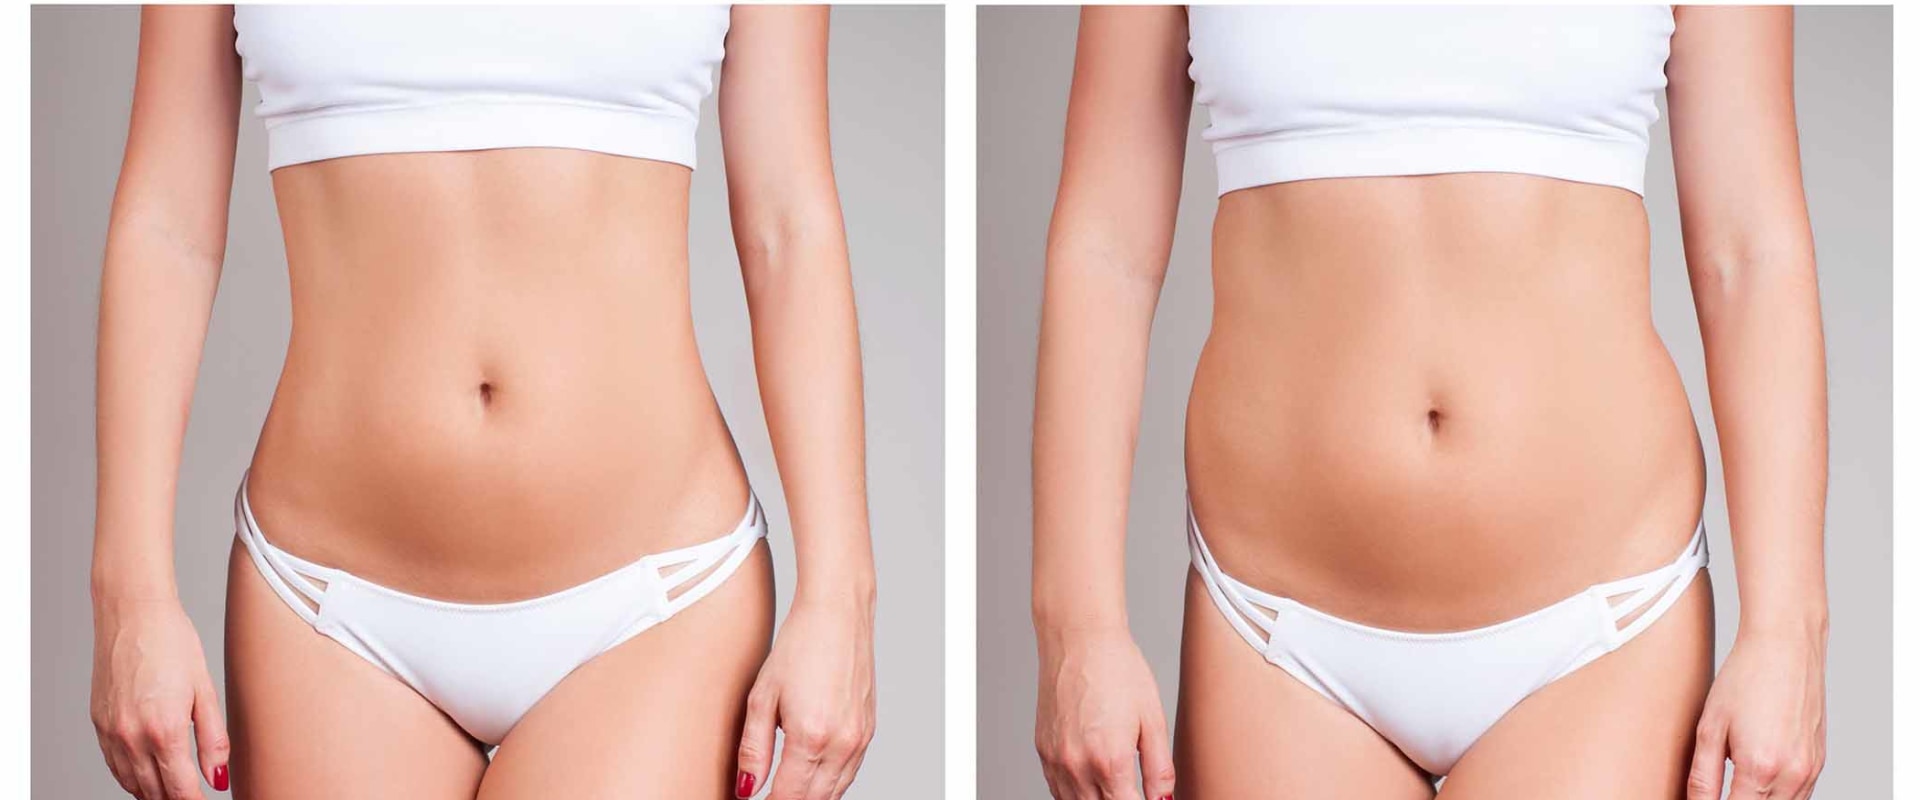 How Long Do the Results of Fat Reduction Treatments Last?